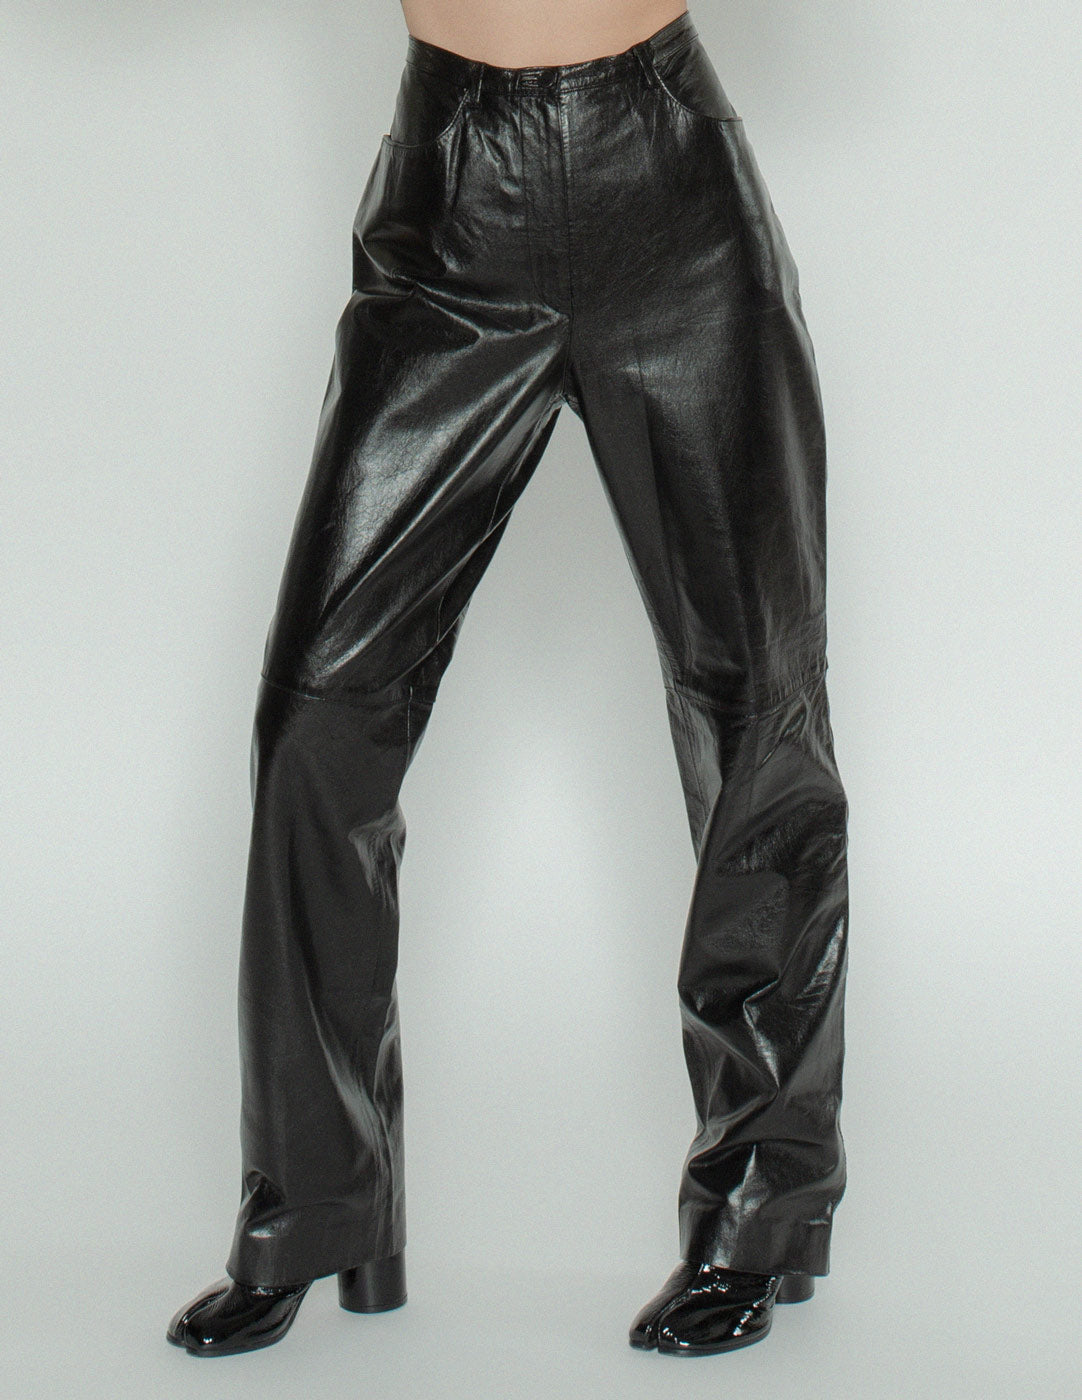 Missoni black leather trousers front detail